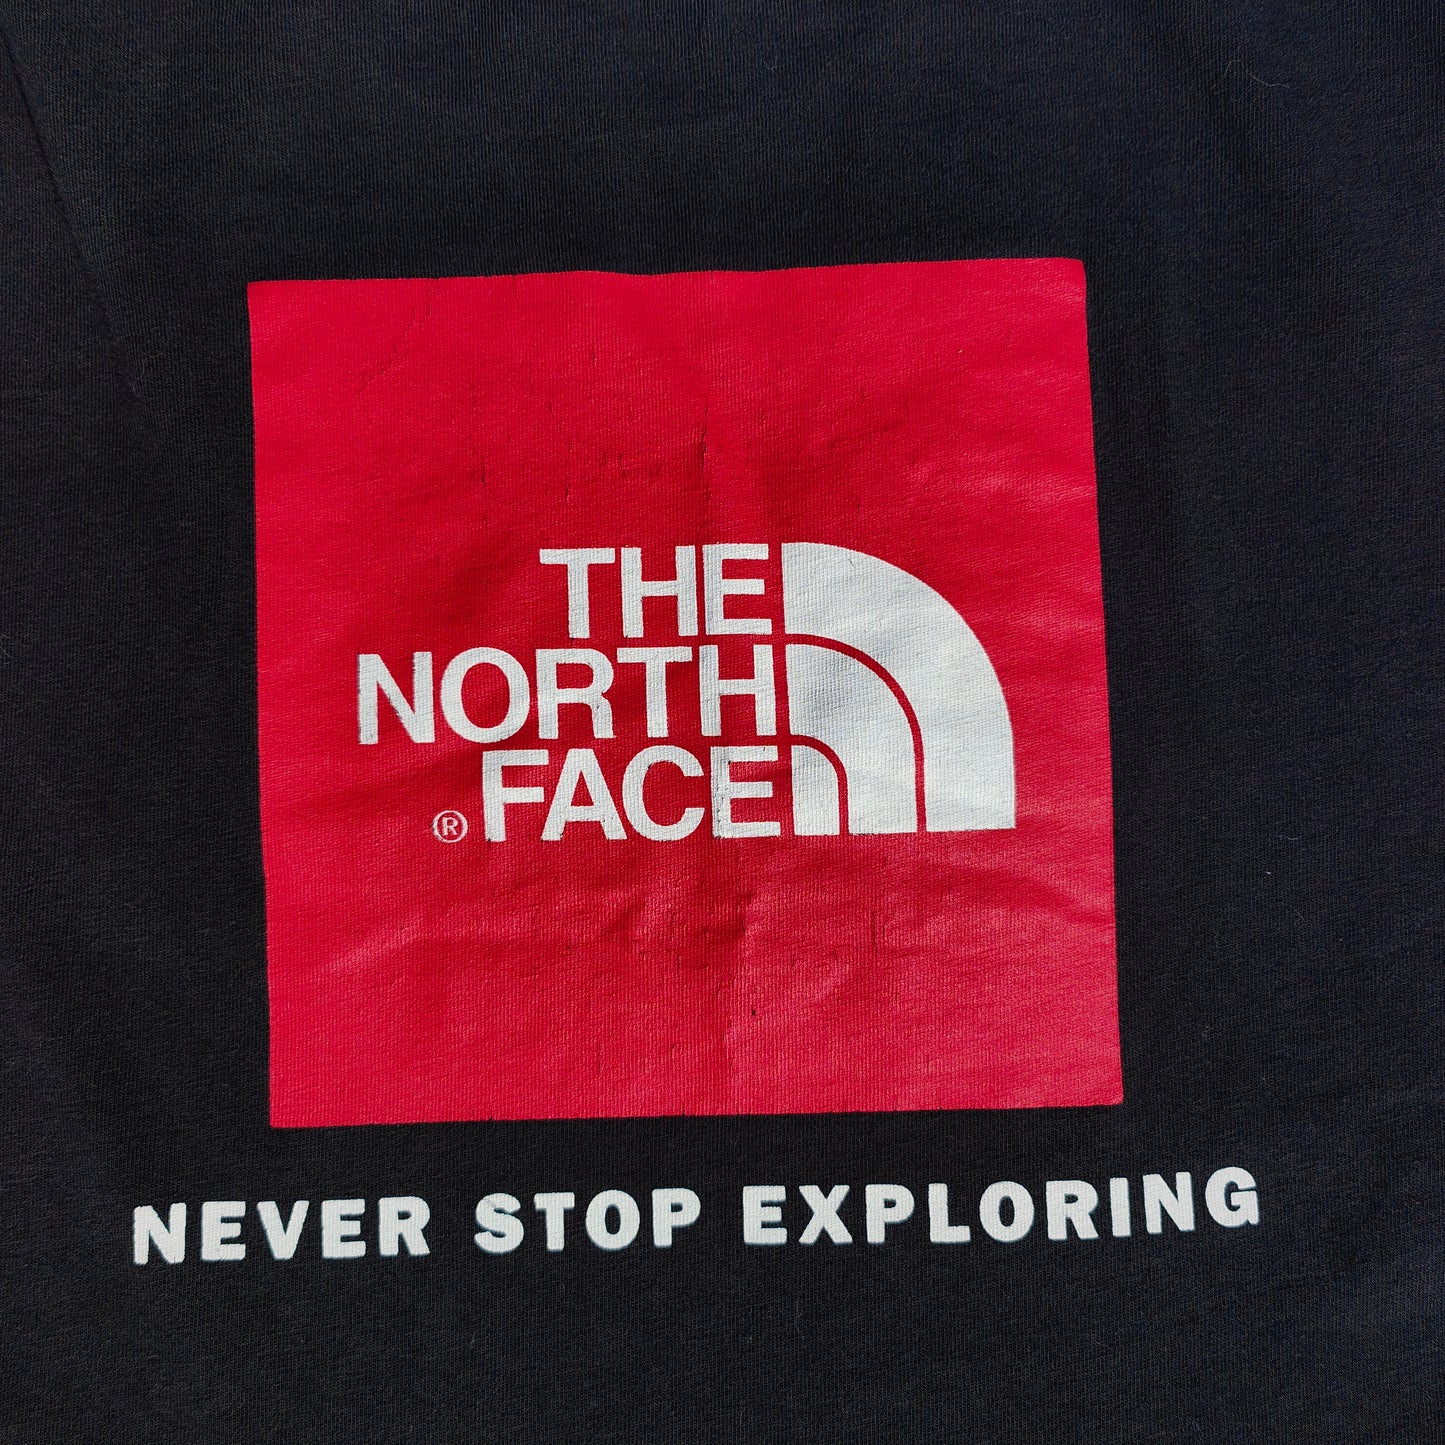 The North Face Longsleeve T Shirt - LARGE